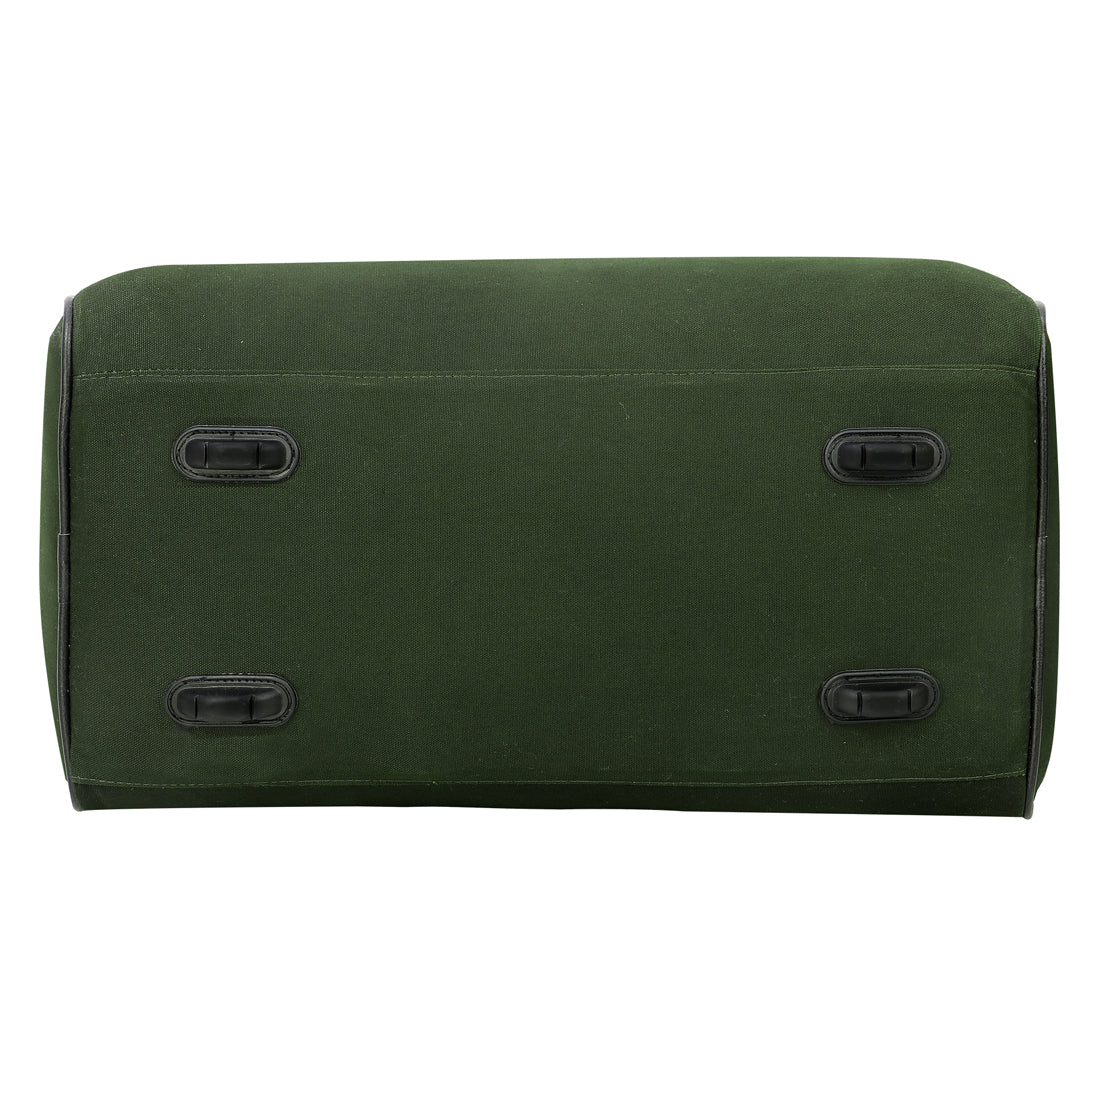 Leather World 30 Liter Canvas Duffle Bag for Travel Business Trip Overnight Luggage Bag Men and Women - Green